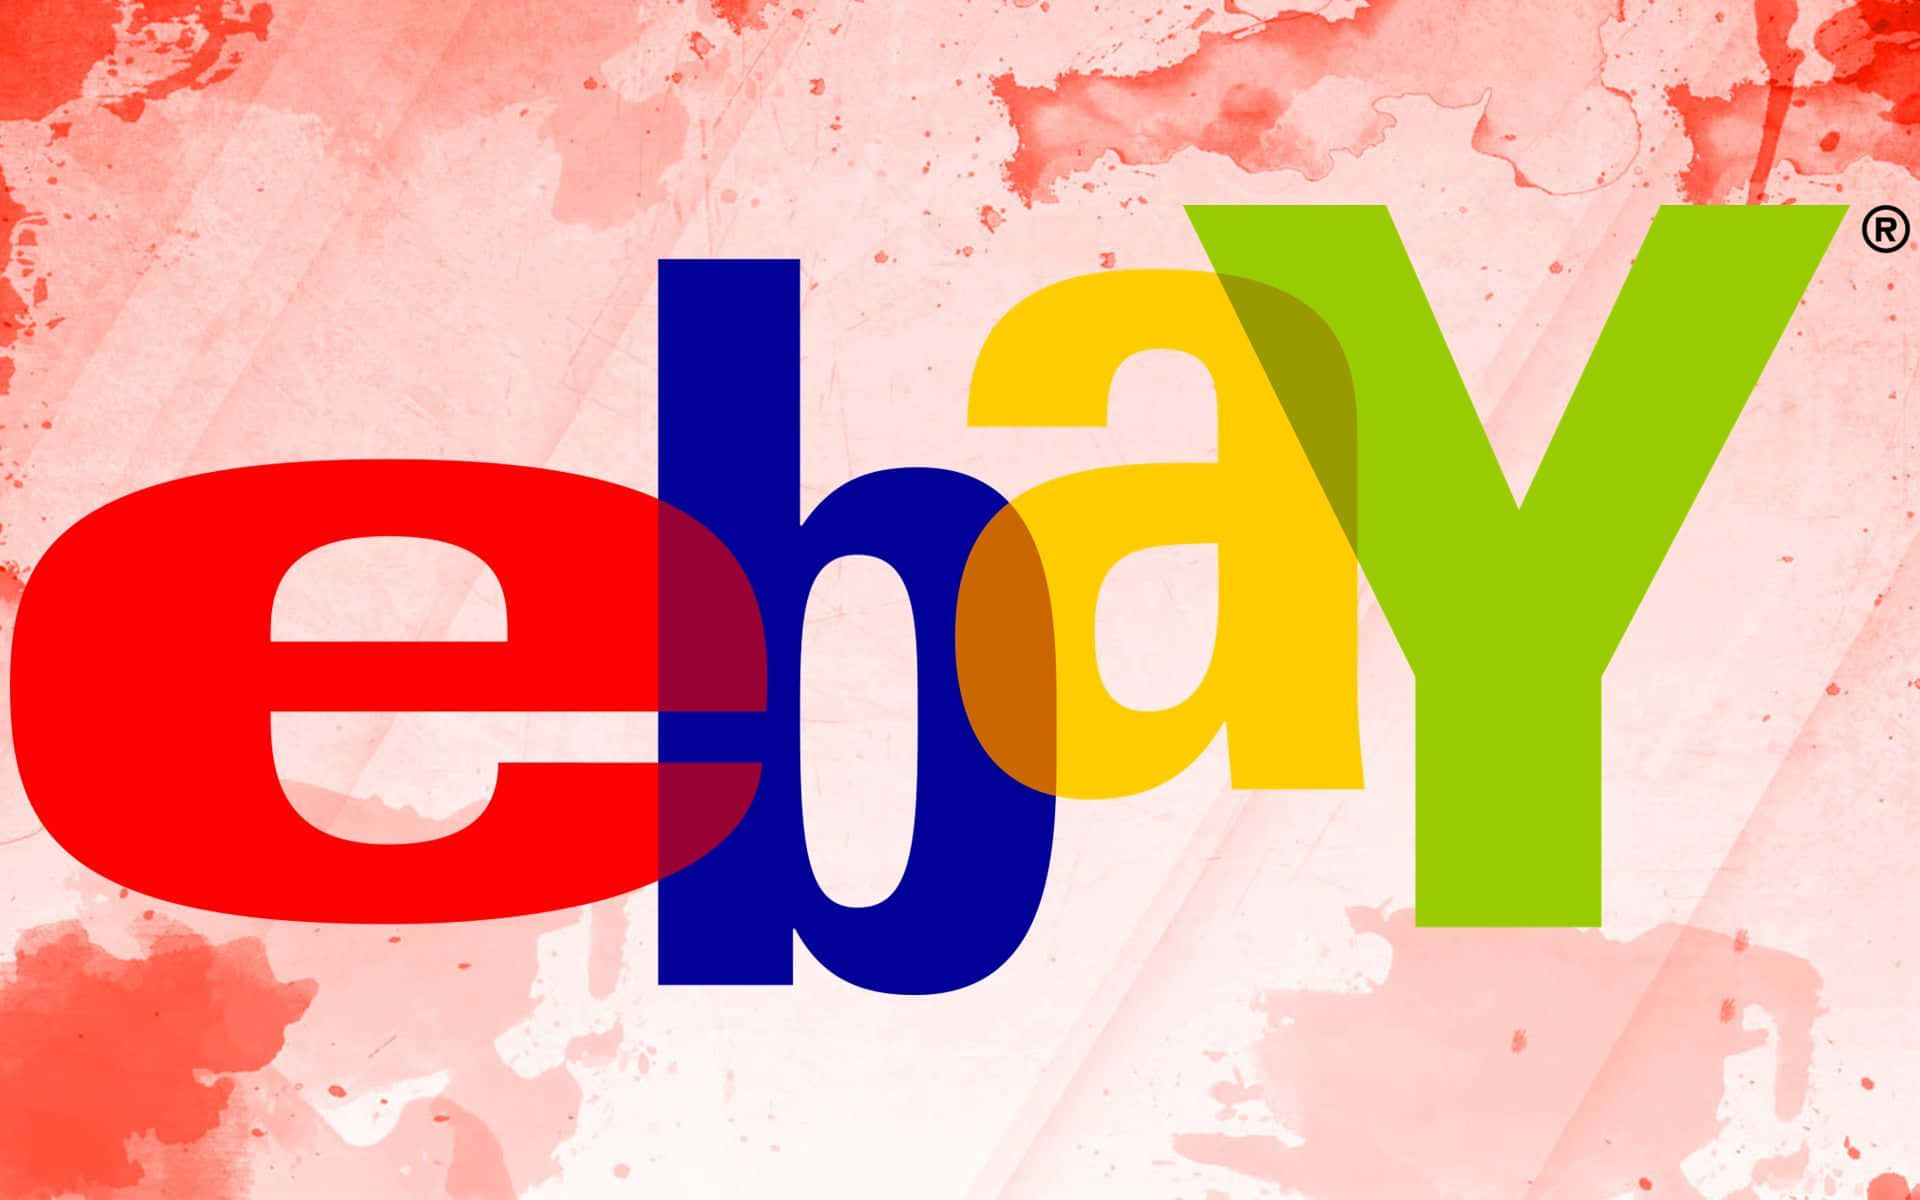 eBay UK Logo Against Red Abstract Background Wallpaper